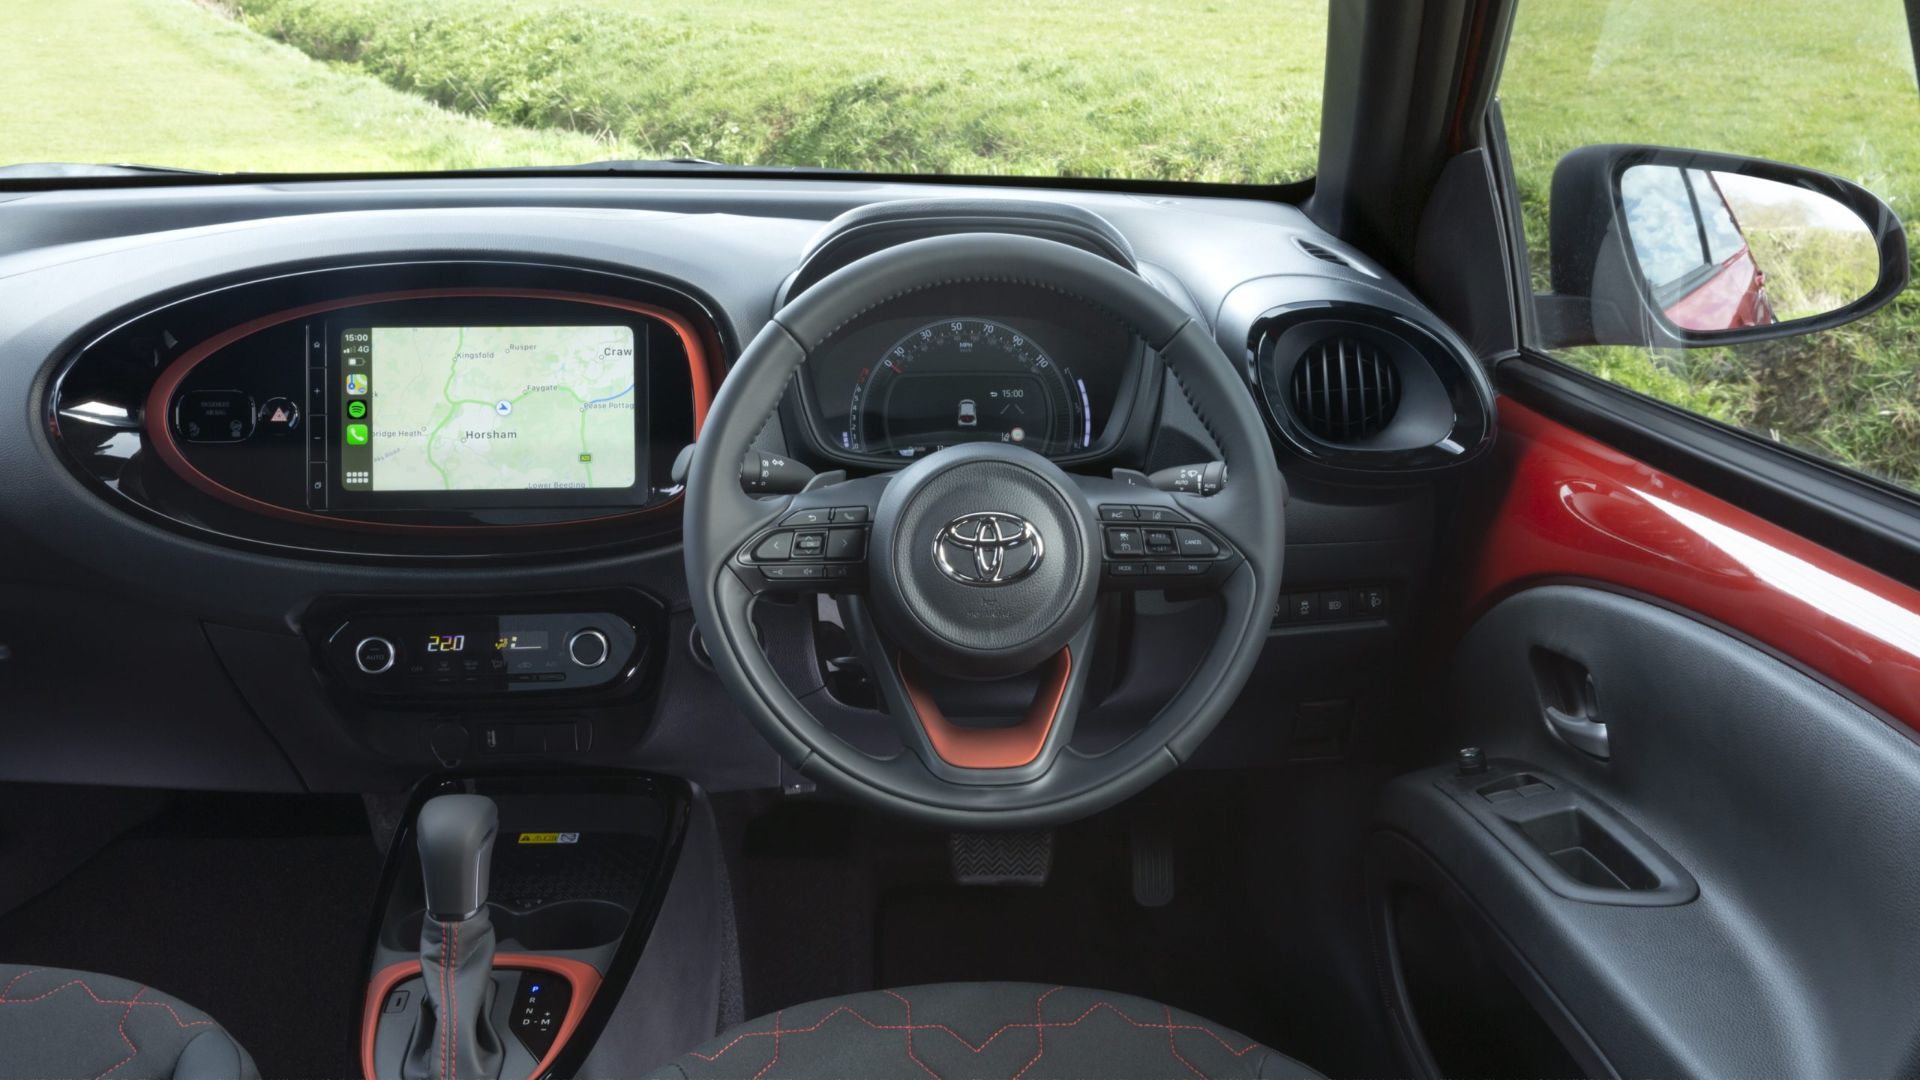 Toyota Aygo 1.0, Reviews, Test Drives